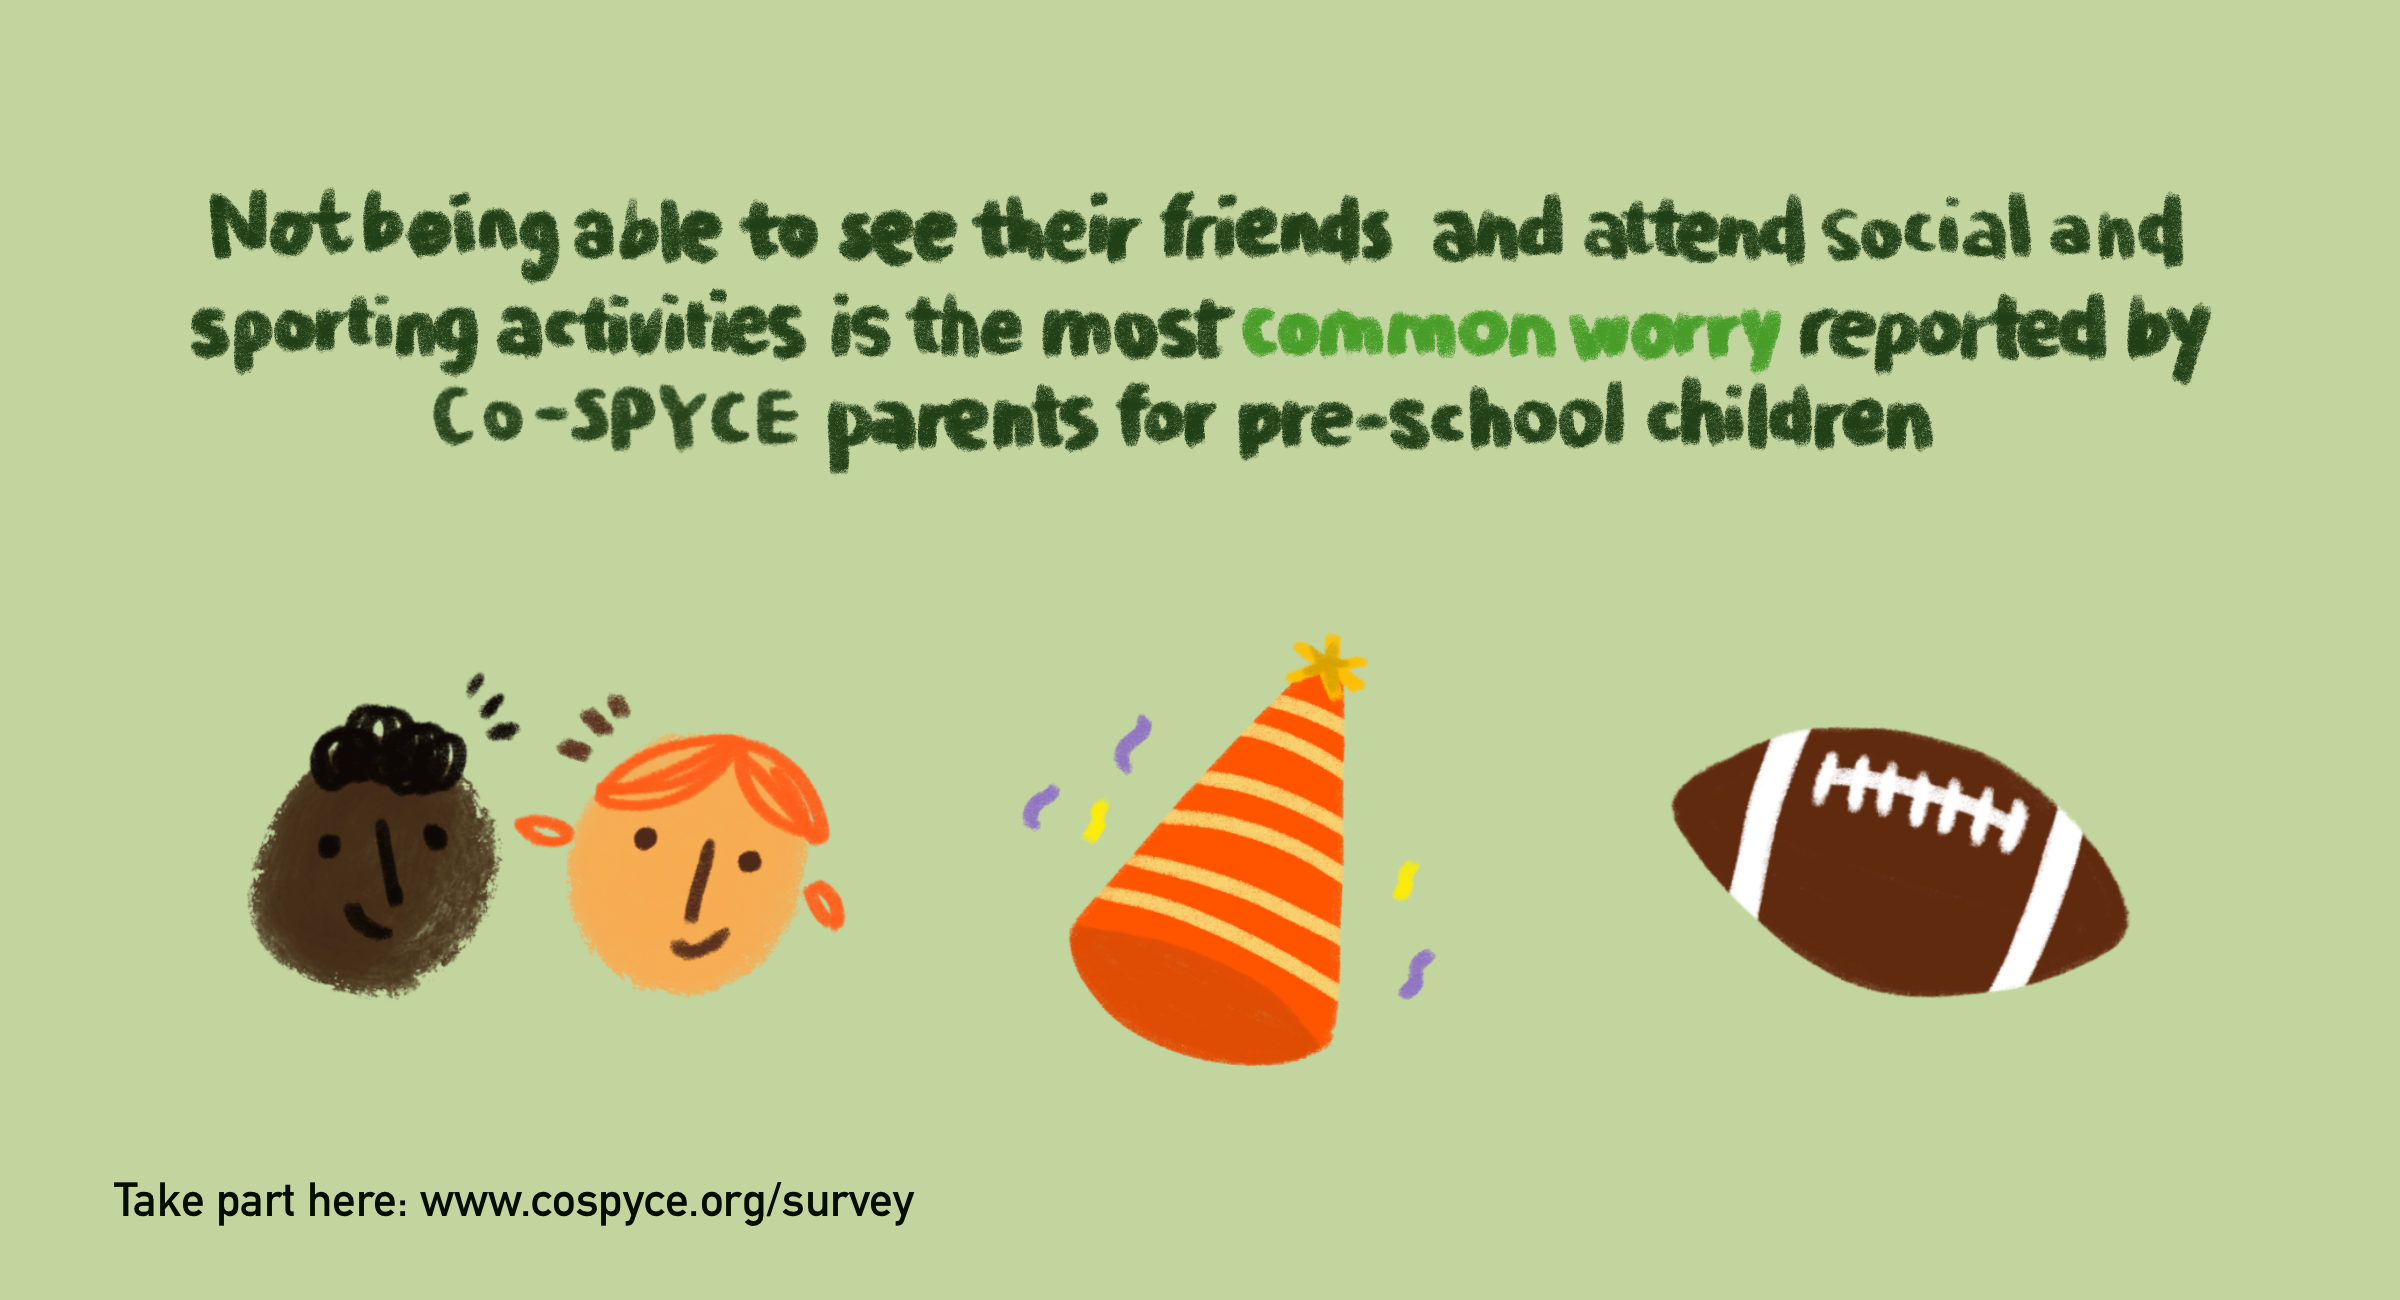 infographic - Not being able to see their friends and attend social and sporting activities is the most common worry reported by participating parents/carers for pre-school children.